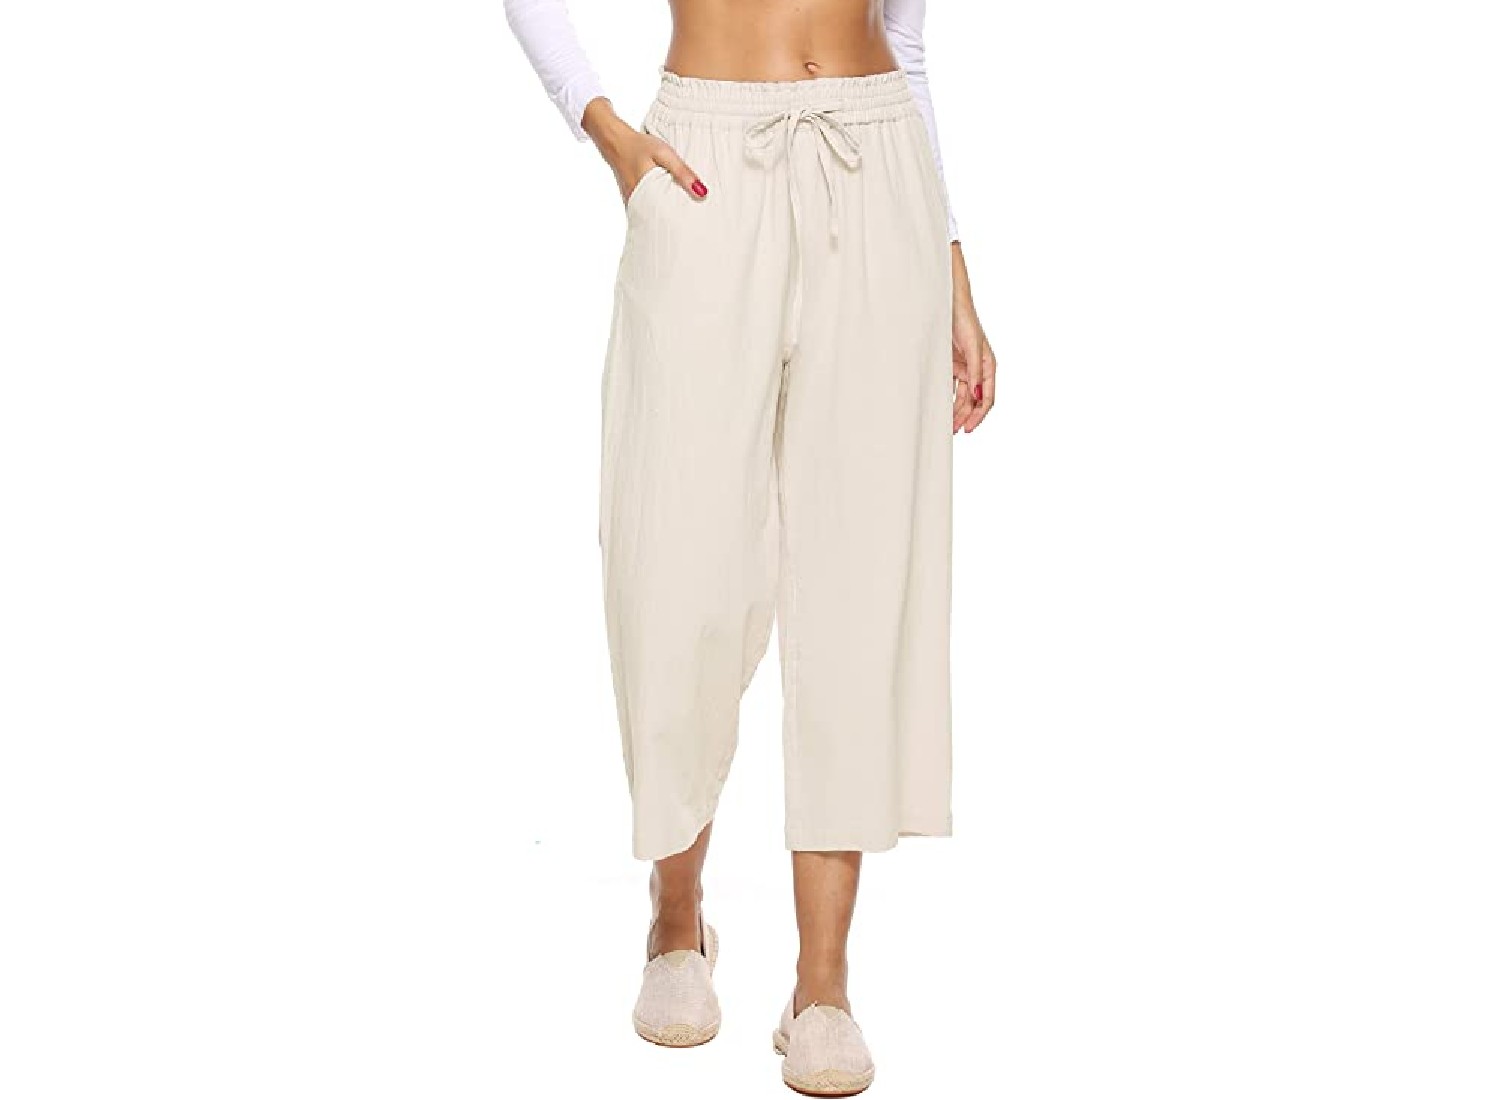 Neutrally colored linen pants